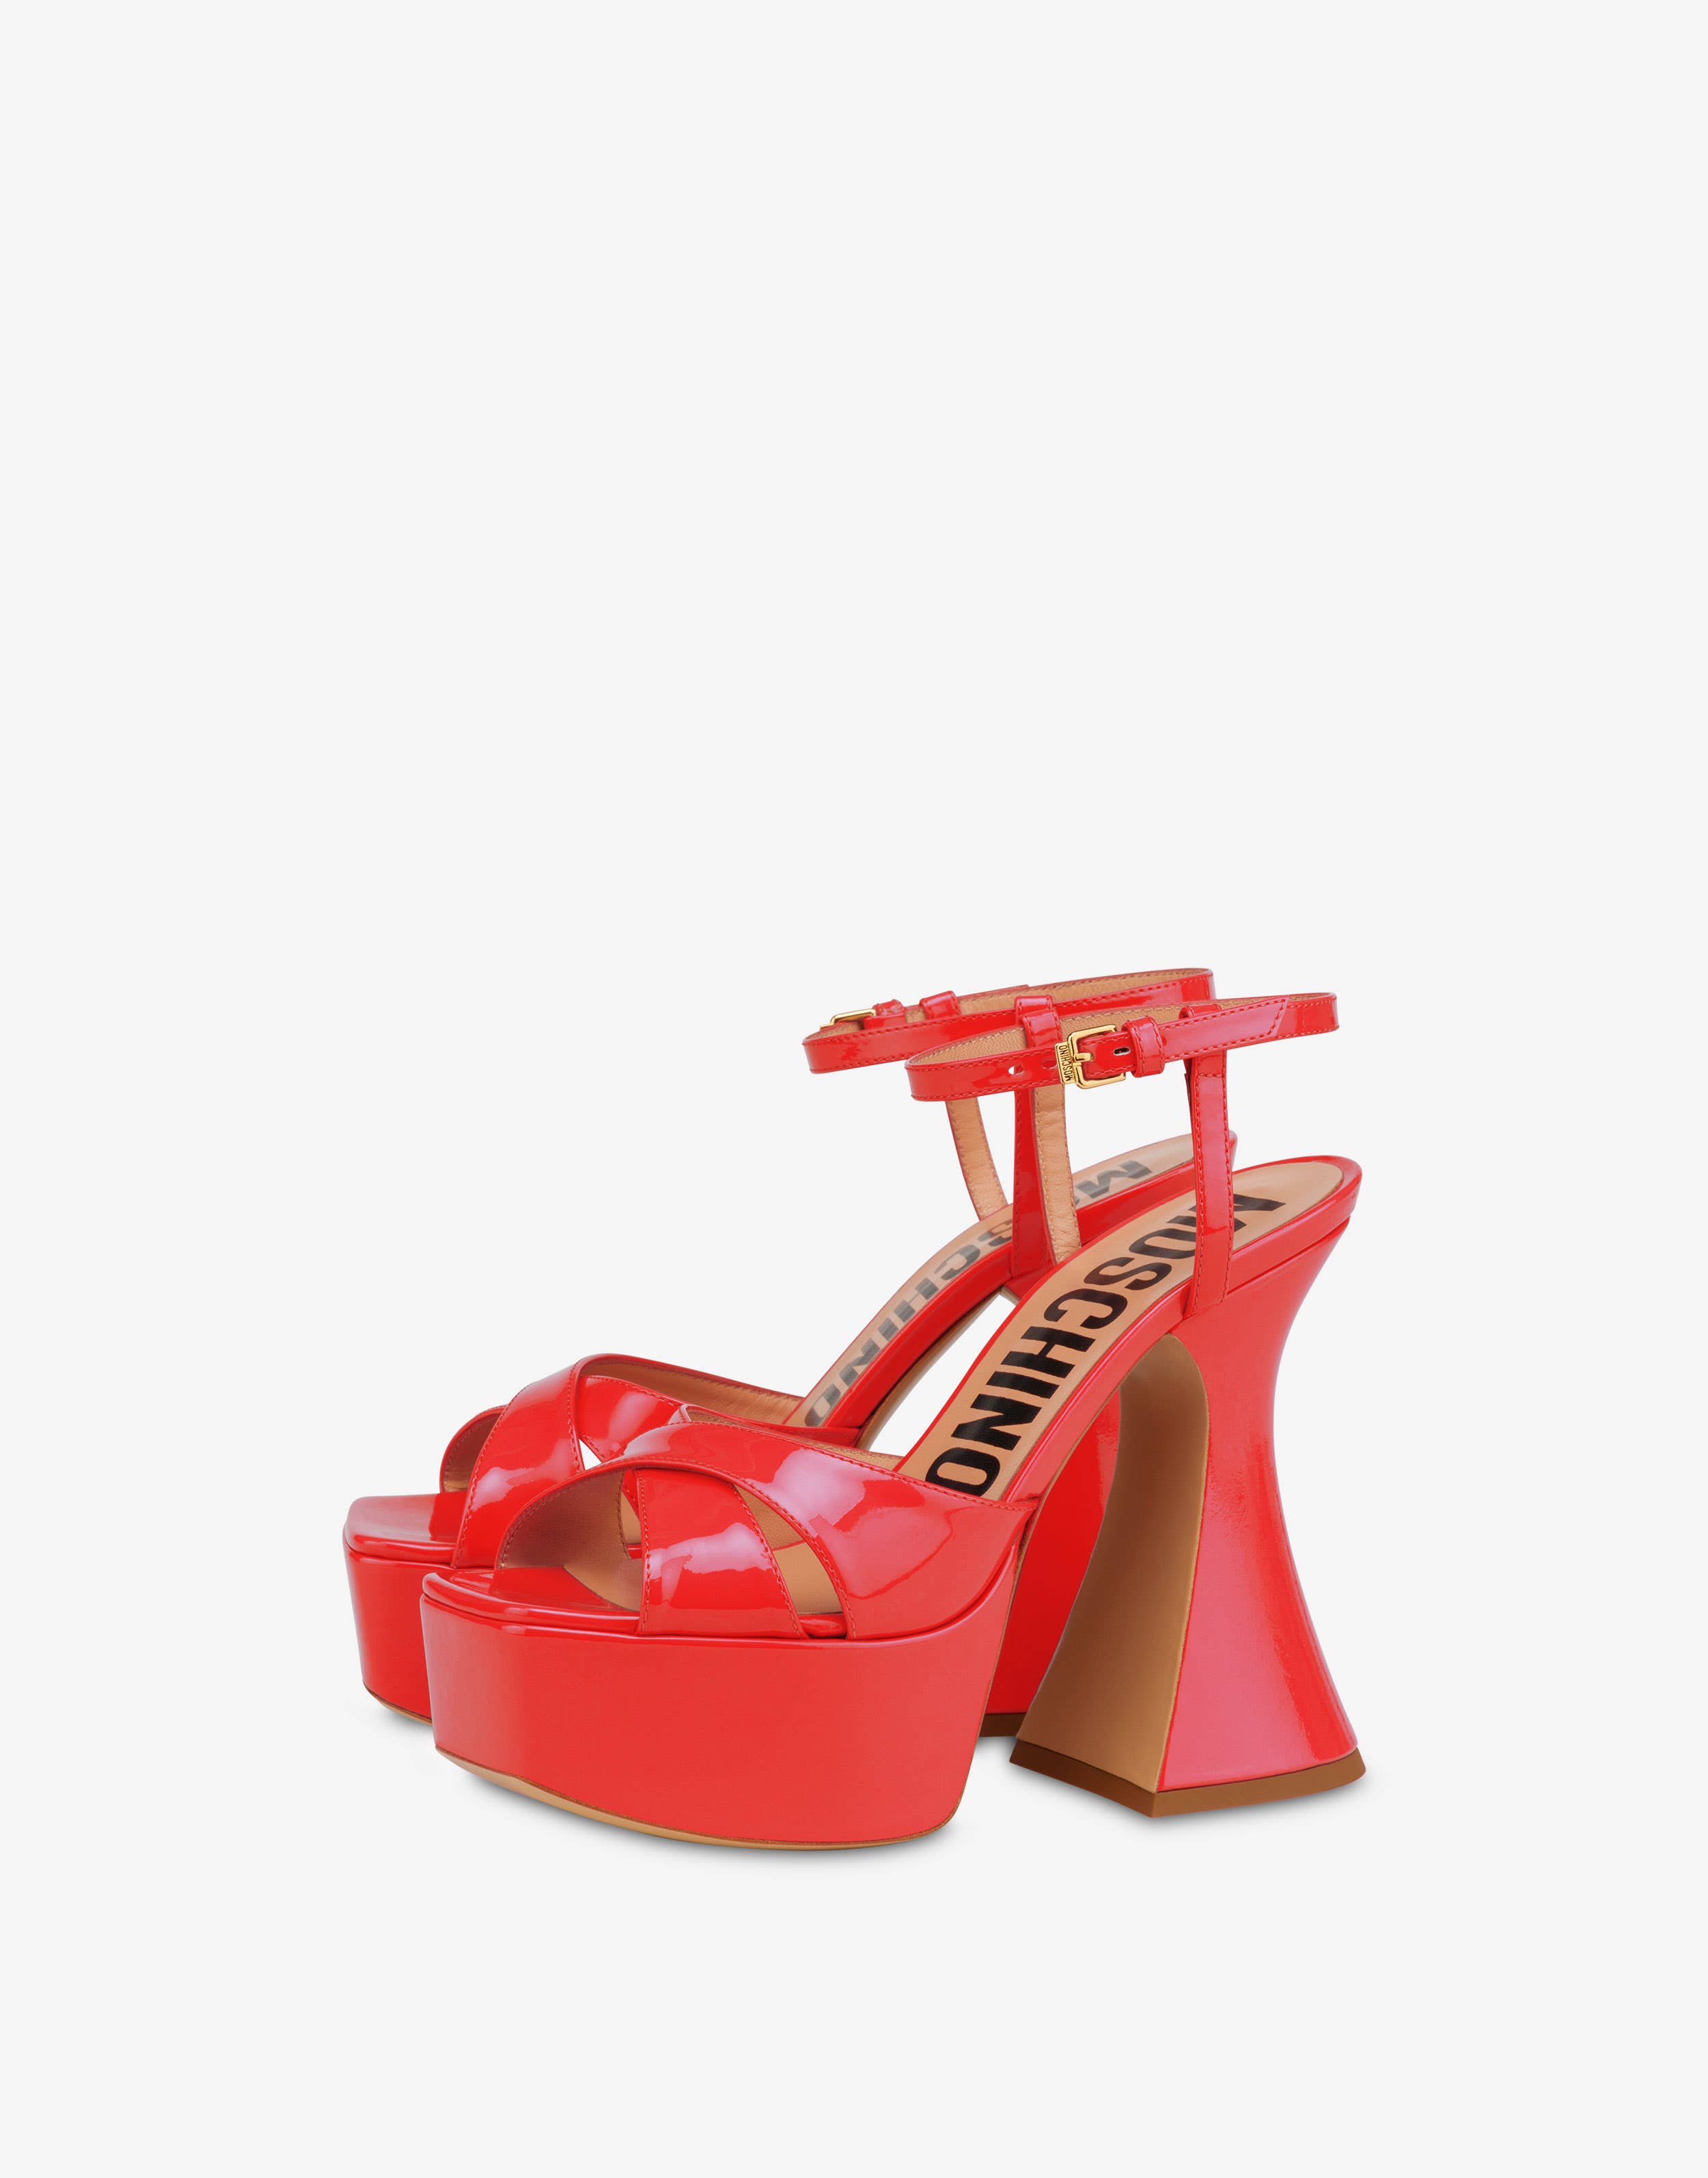 Top more than 63 moschino sandals sale super hot